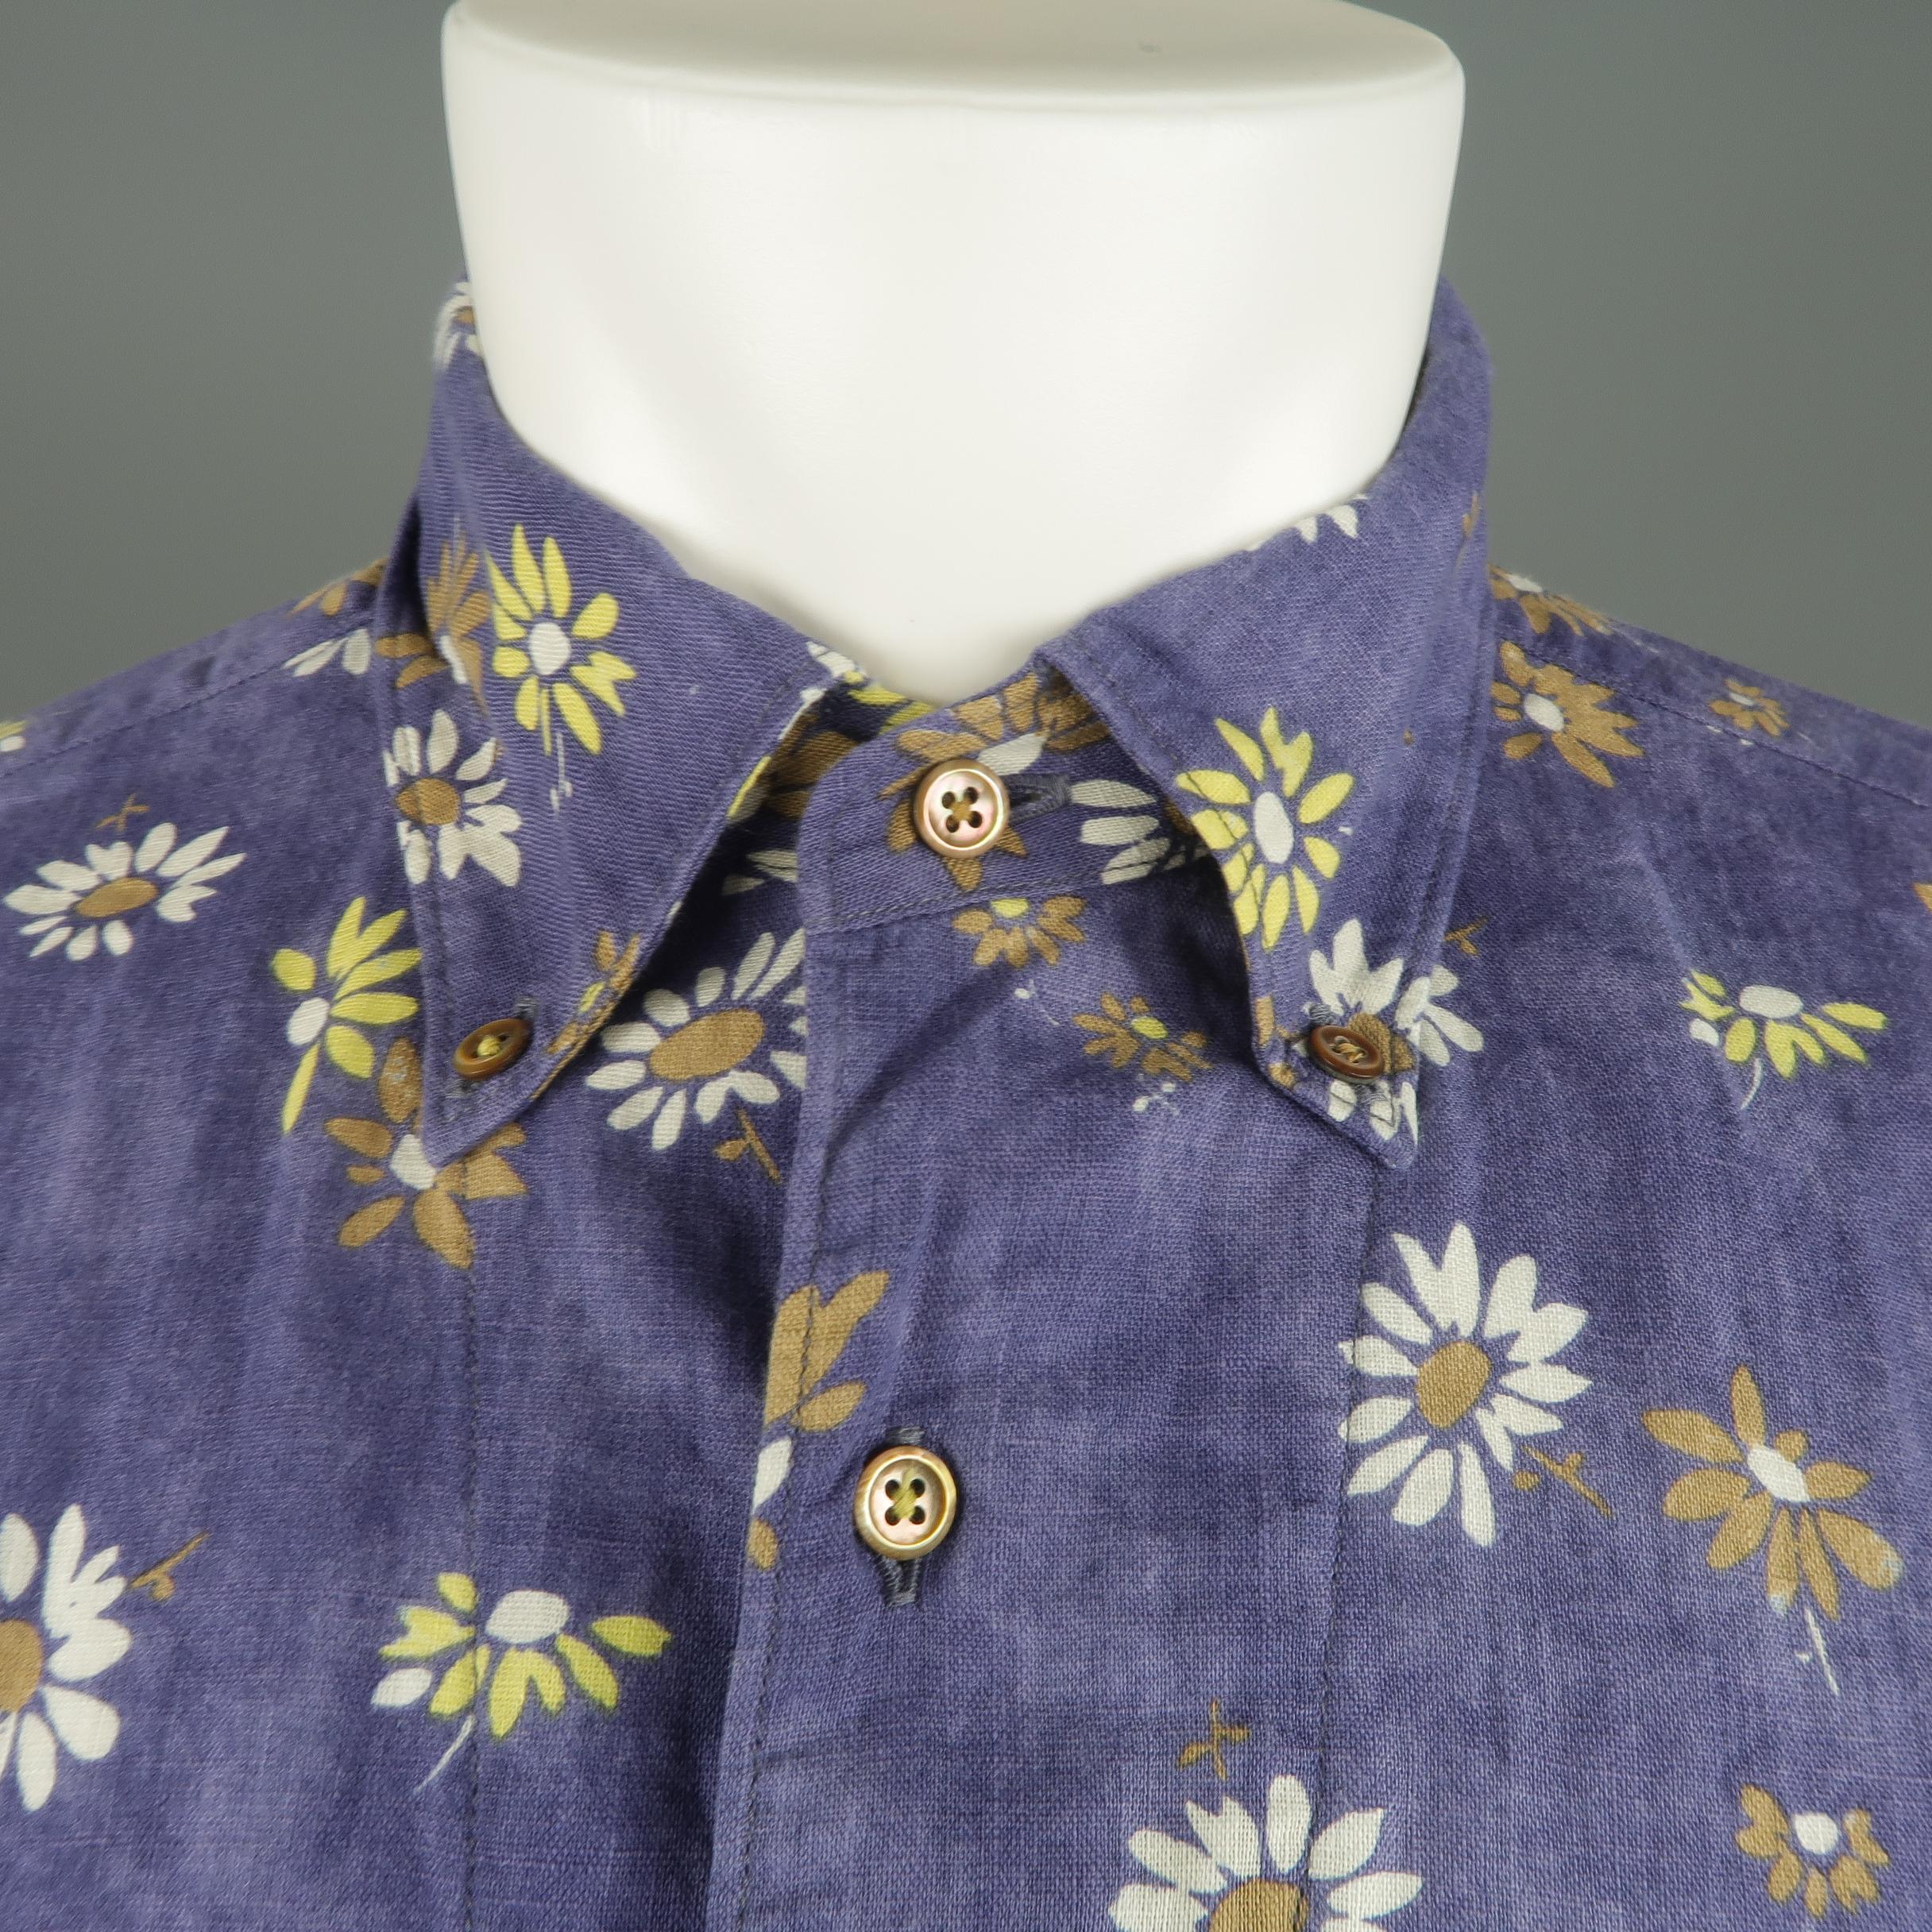 45RPM shirt comes in a tie dye washed indigo blue cotton linen blend with all over floral print, a pointed  button down collar, patch breast pocket, and embroidered R logo. Made in Japan.
 
Excellent Pre-Owned Condition.
Marked: 5
 
Measurements:
